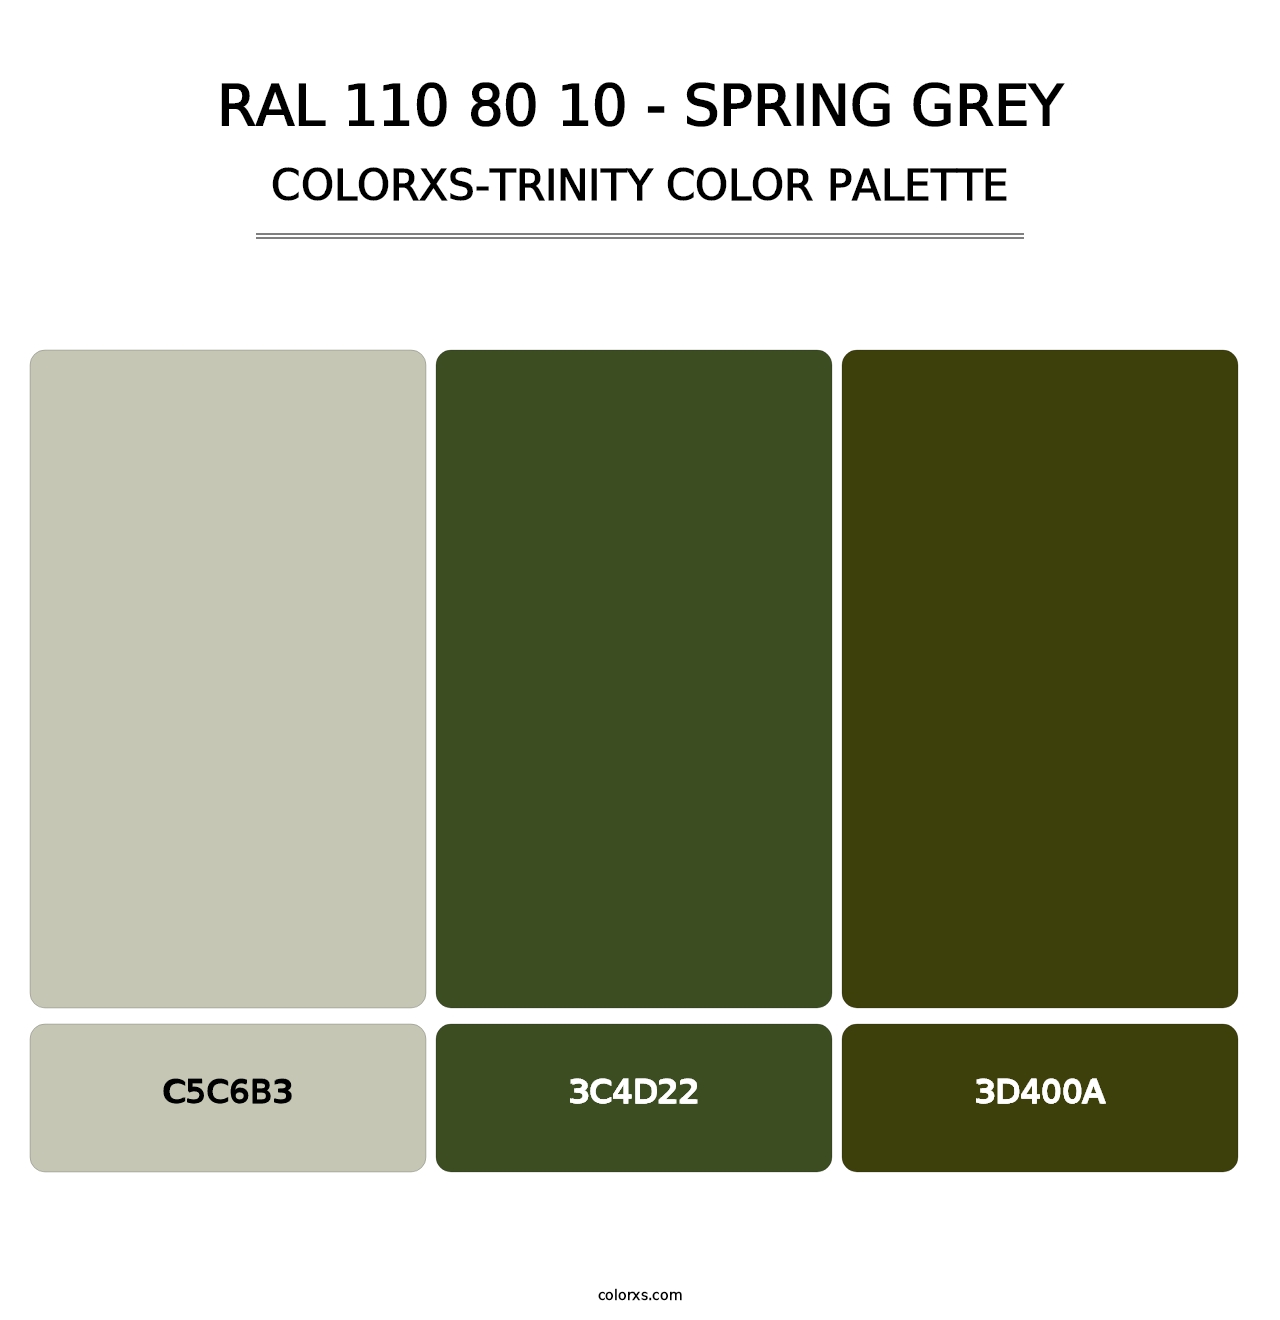 RAL 110 80 10 - Spring Grey - Colorxs Trinity Palette